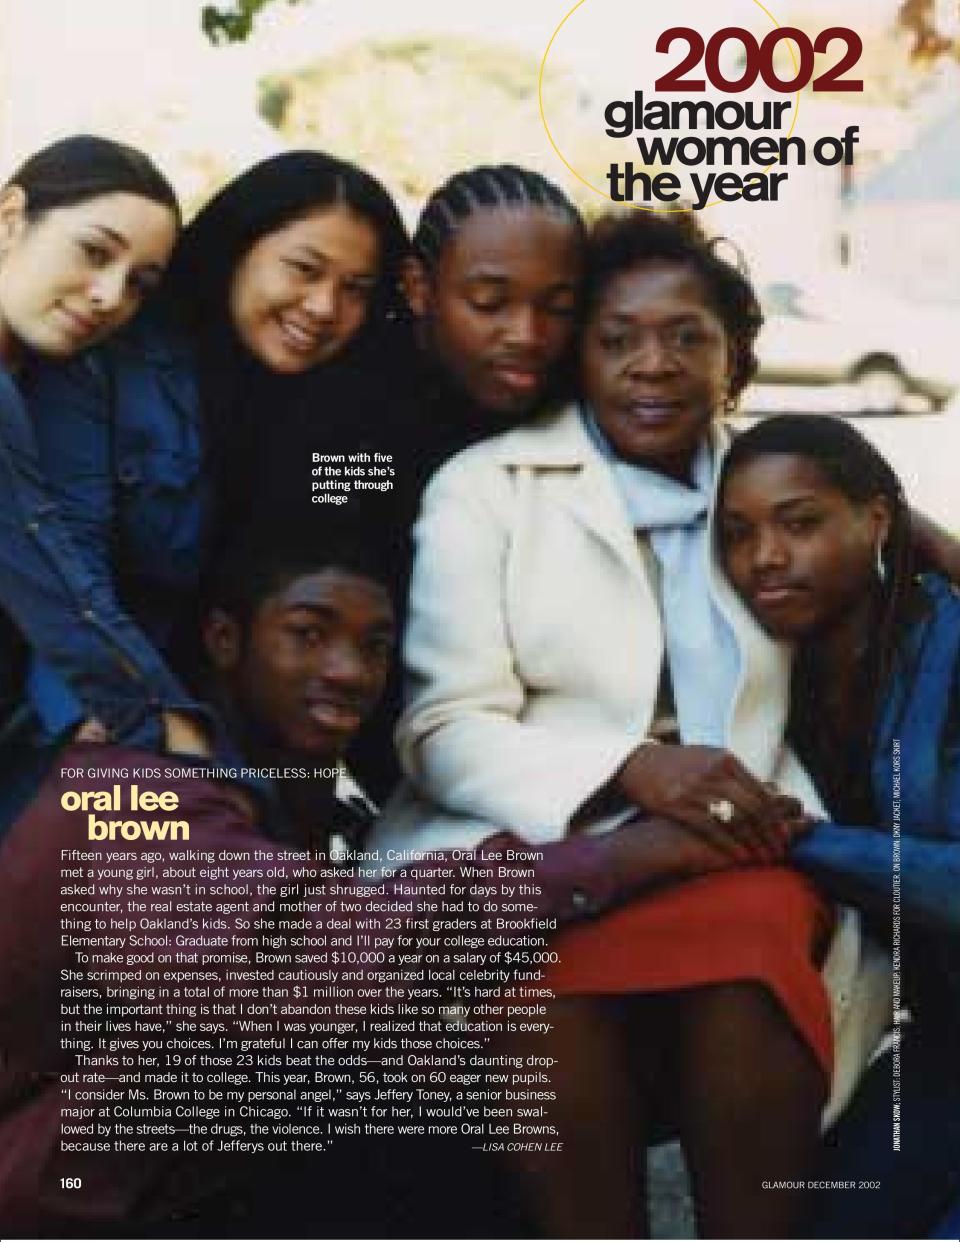 In our December 2002 issue, Oral Lee Brown was photographed with five of the kids she was putting through college.